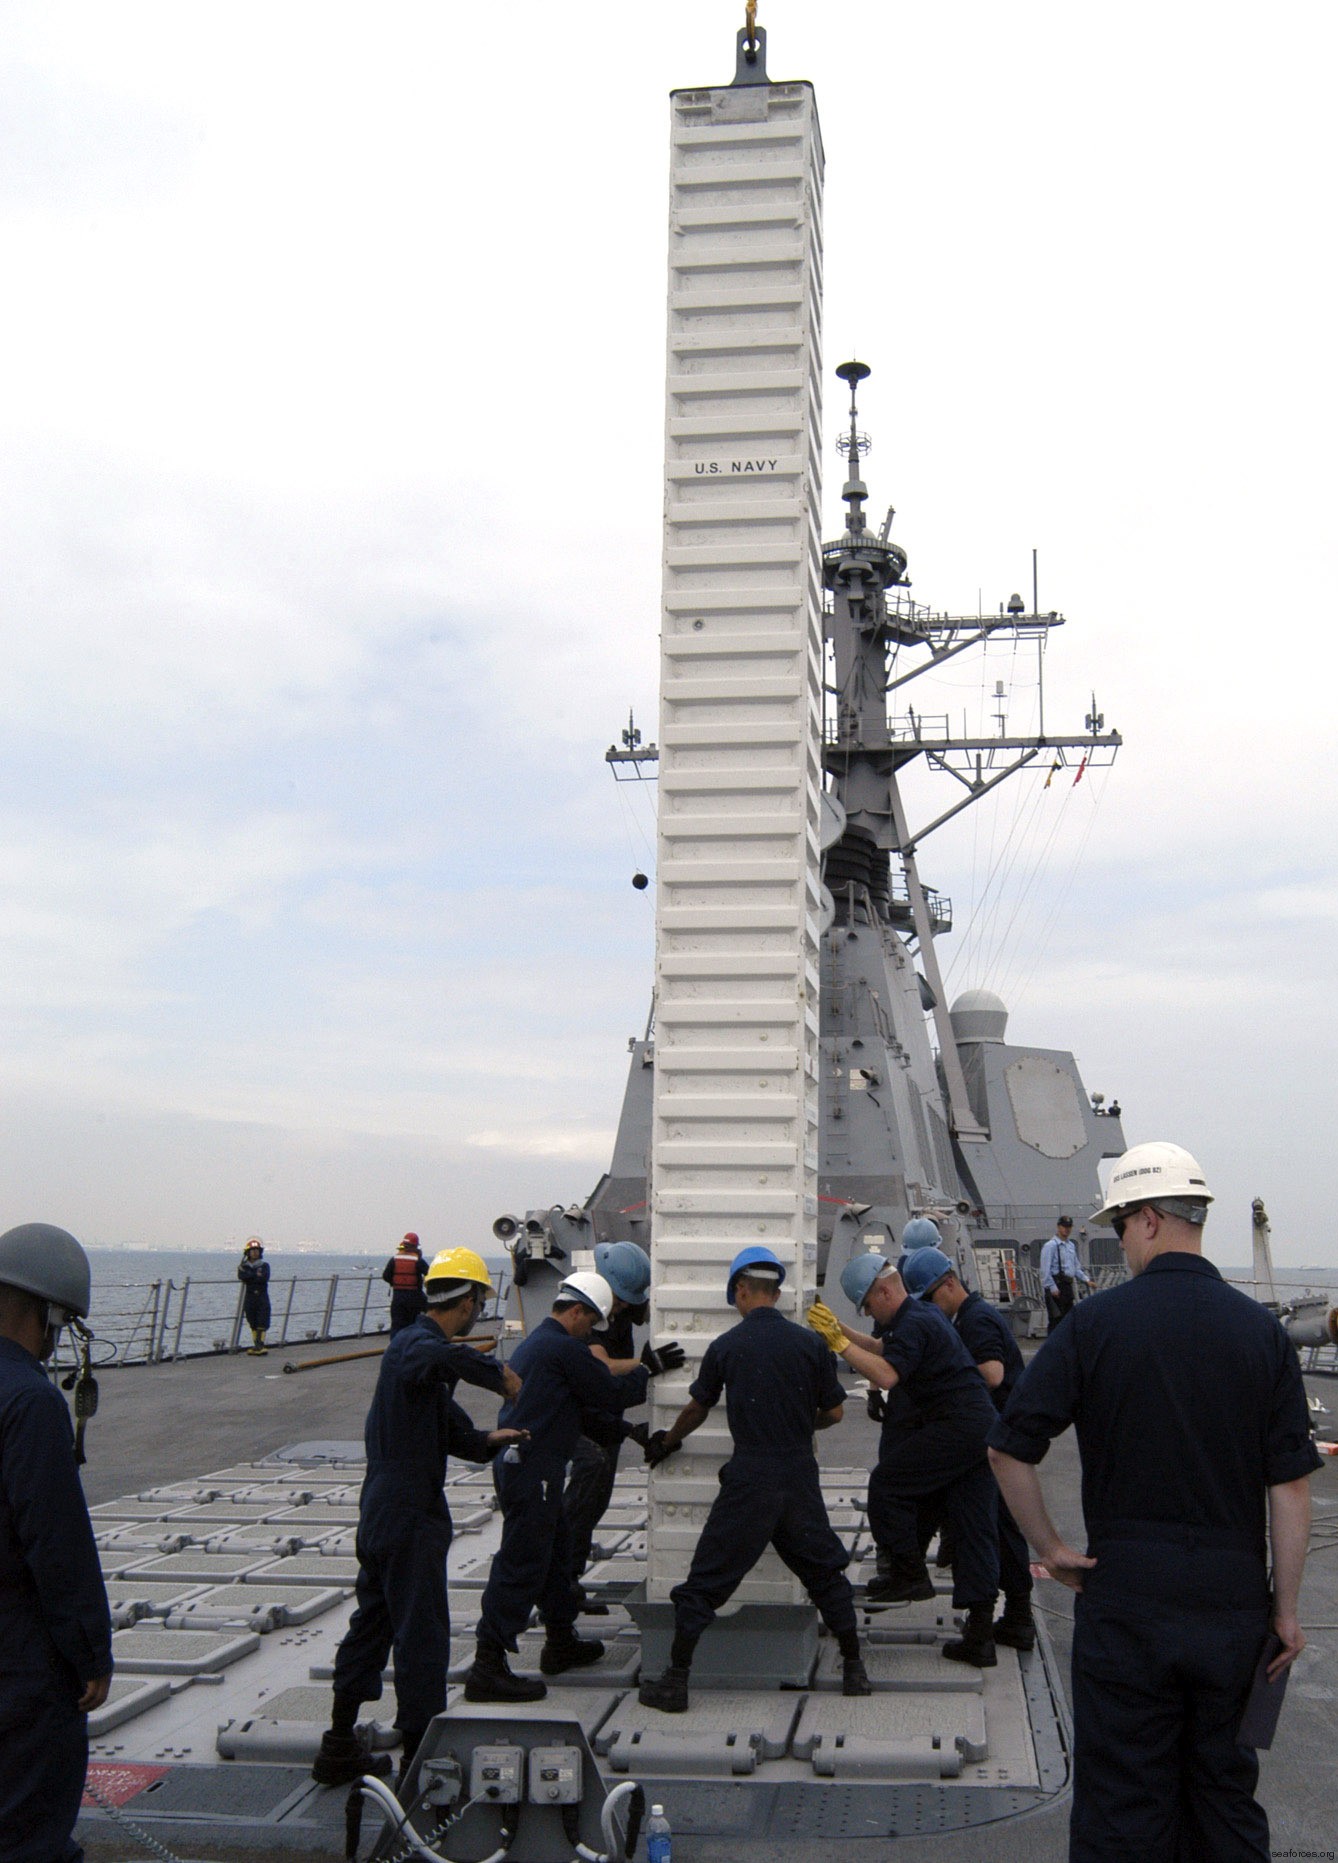 ddg-82 uss lassen arleigh burke class guided missile destroyer aegis 43 weapon onload mk.41 vertical launching system vls